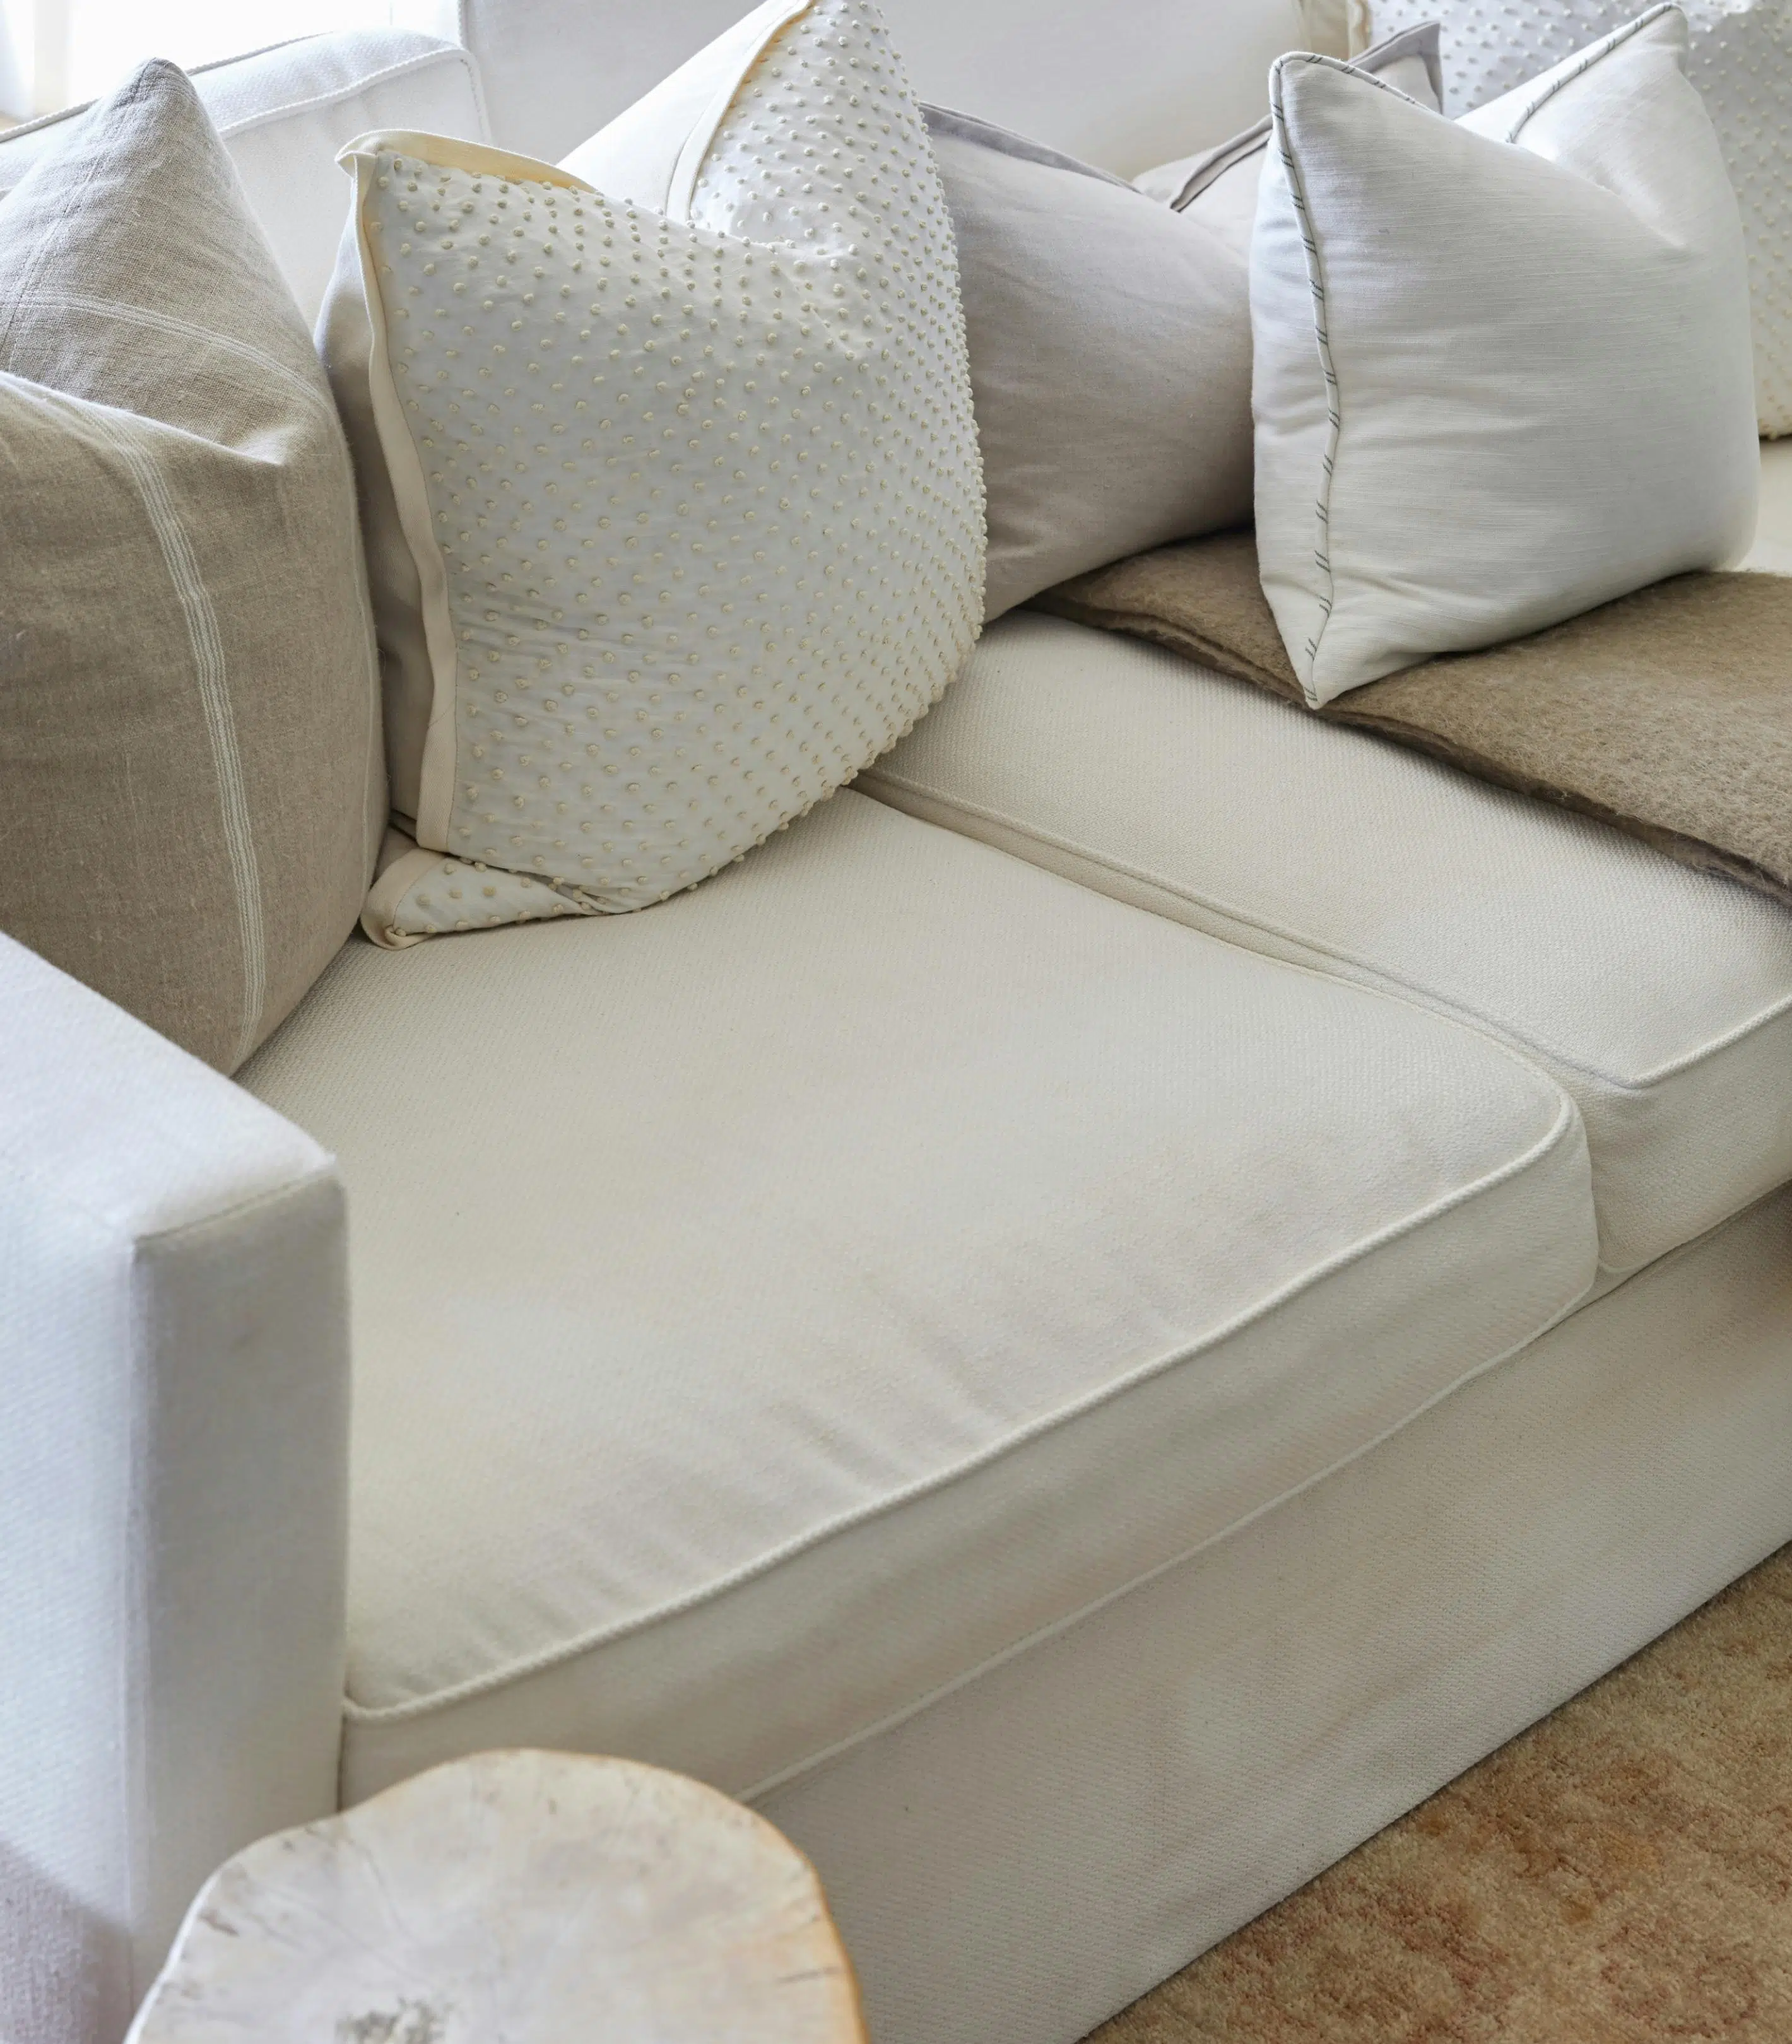 A closeup of a couch upholstered in pale fabric holding cushions in various textures and neutral tones, as well as a folded, light brown blanket